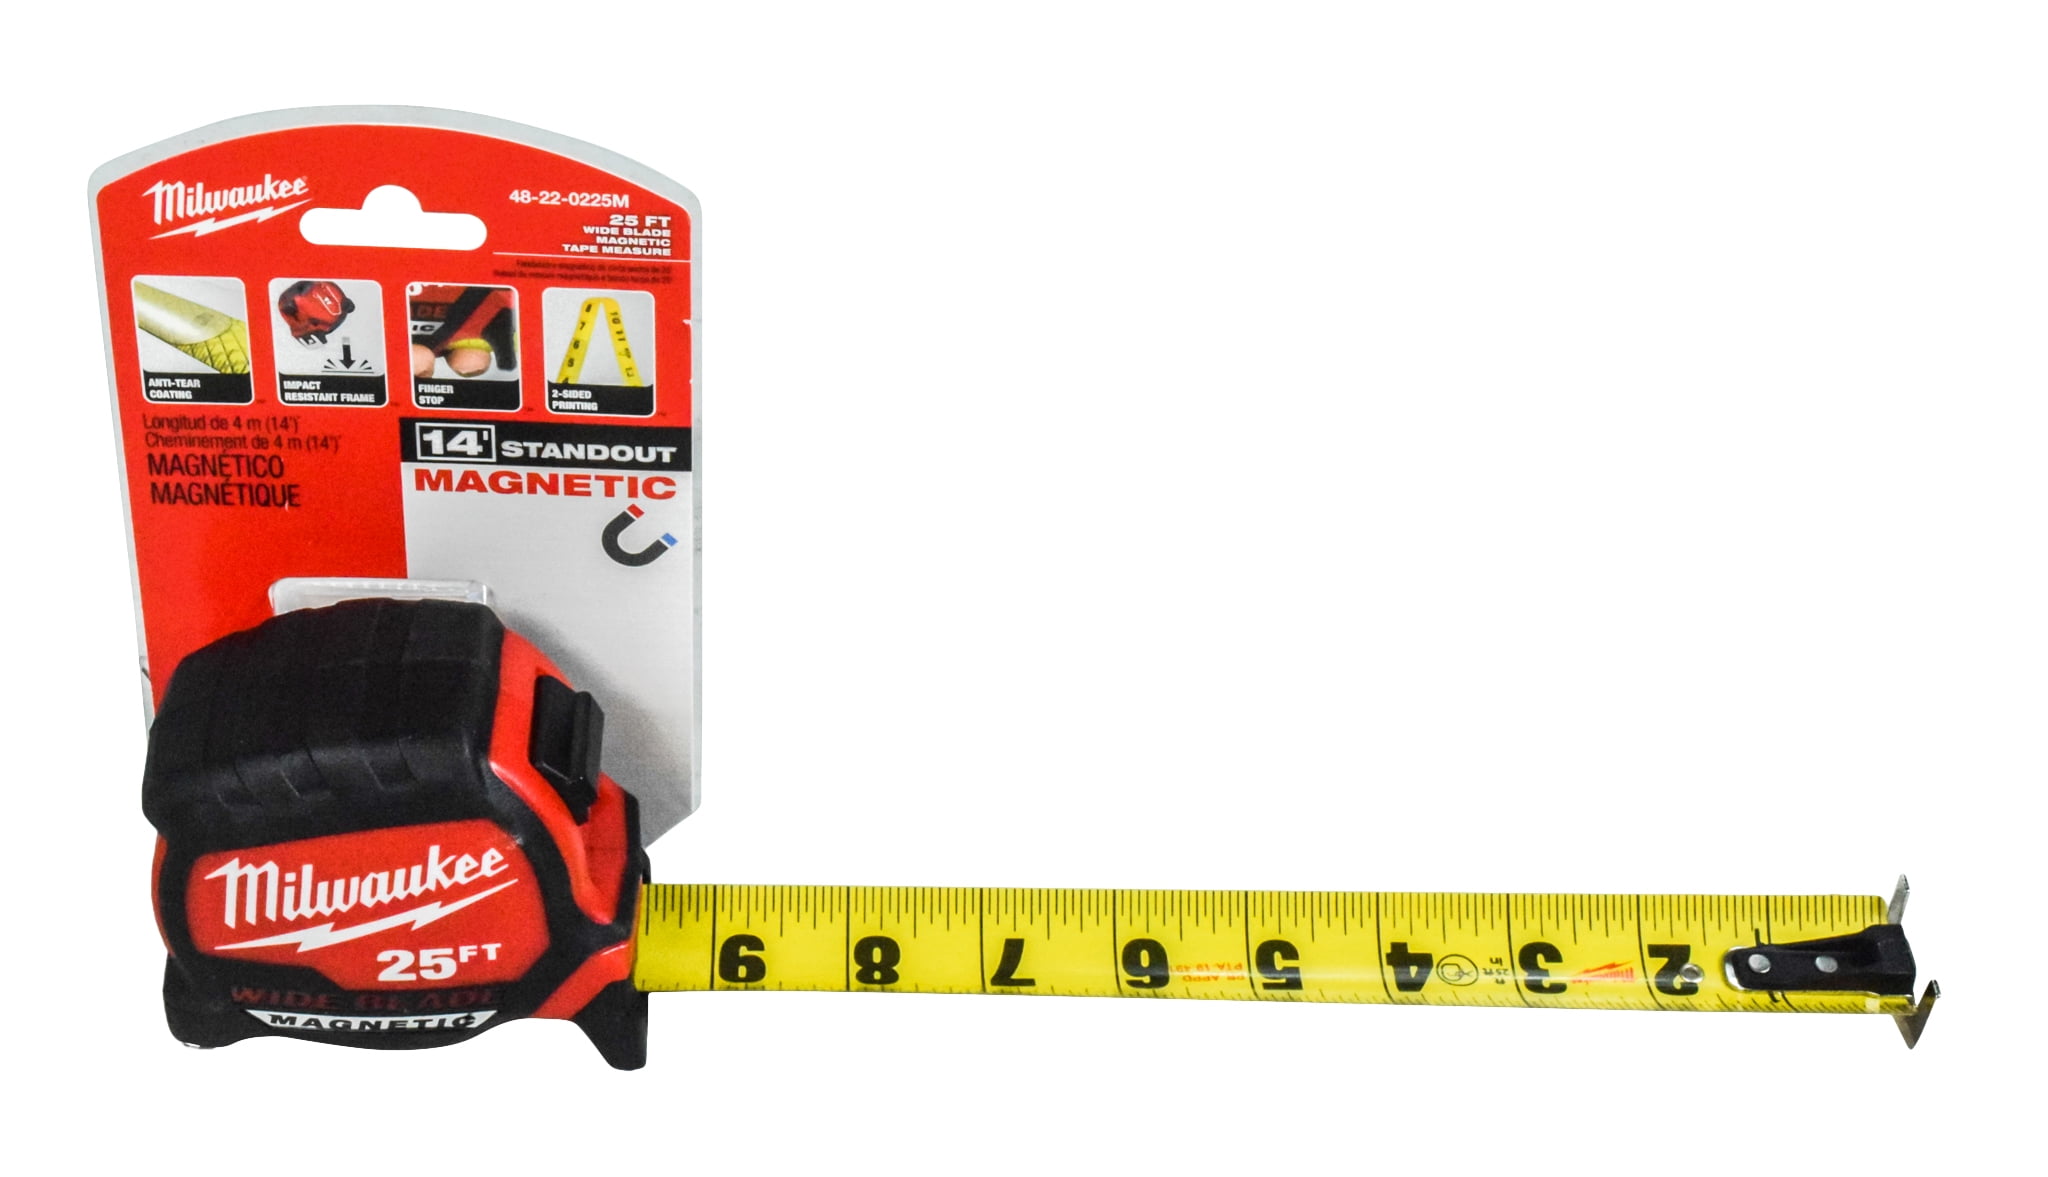 25 ft Compact Wide Blade Magnetic Tape Measure Milwaukee 